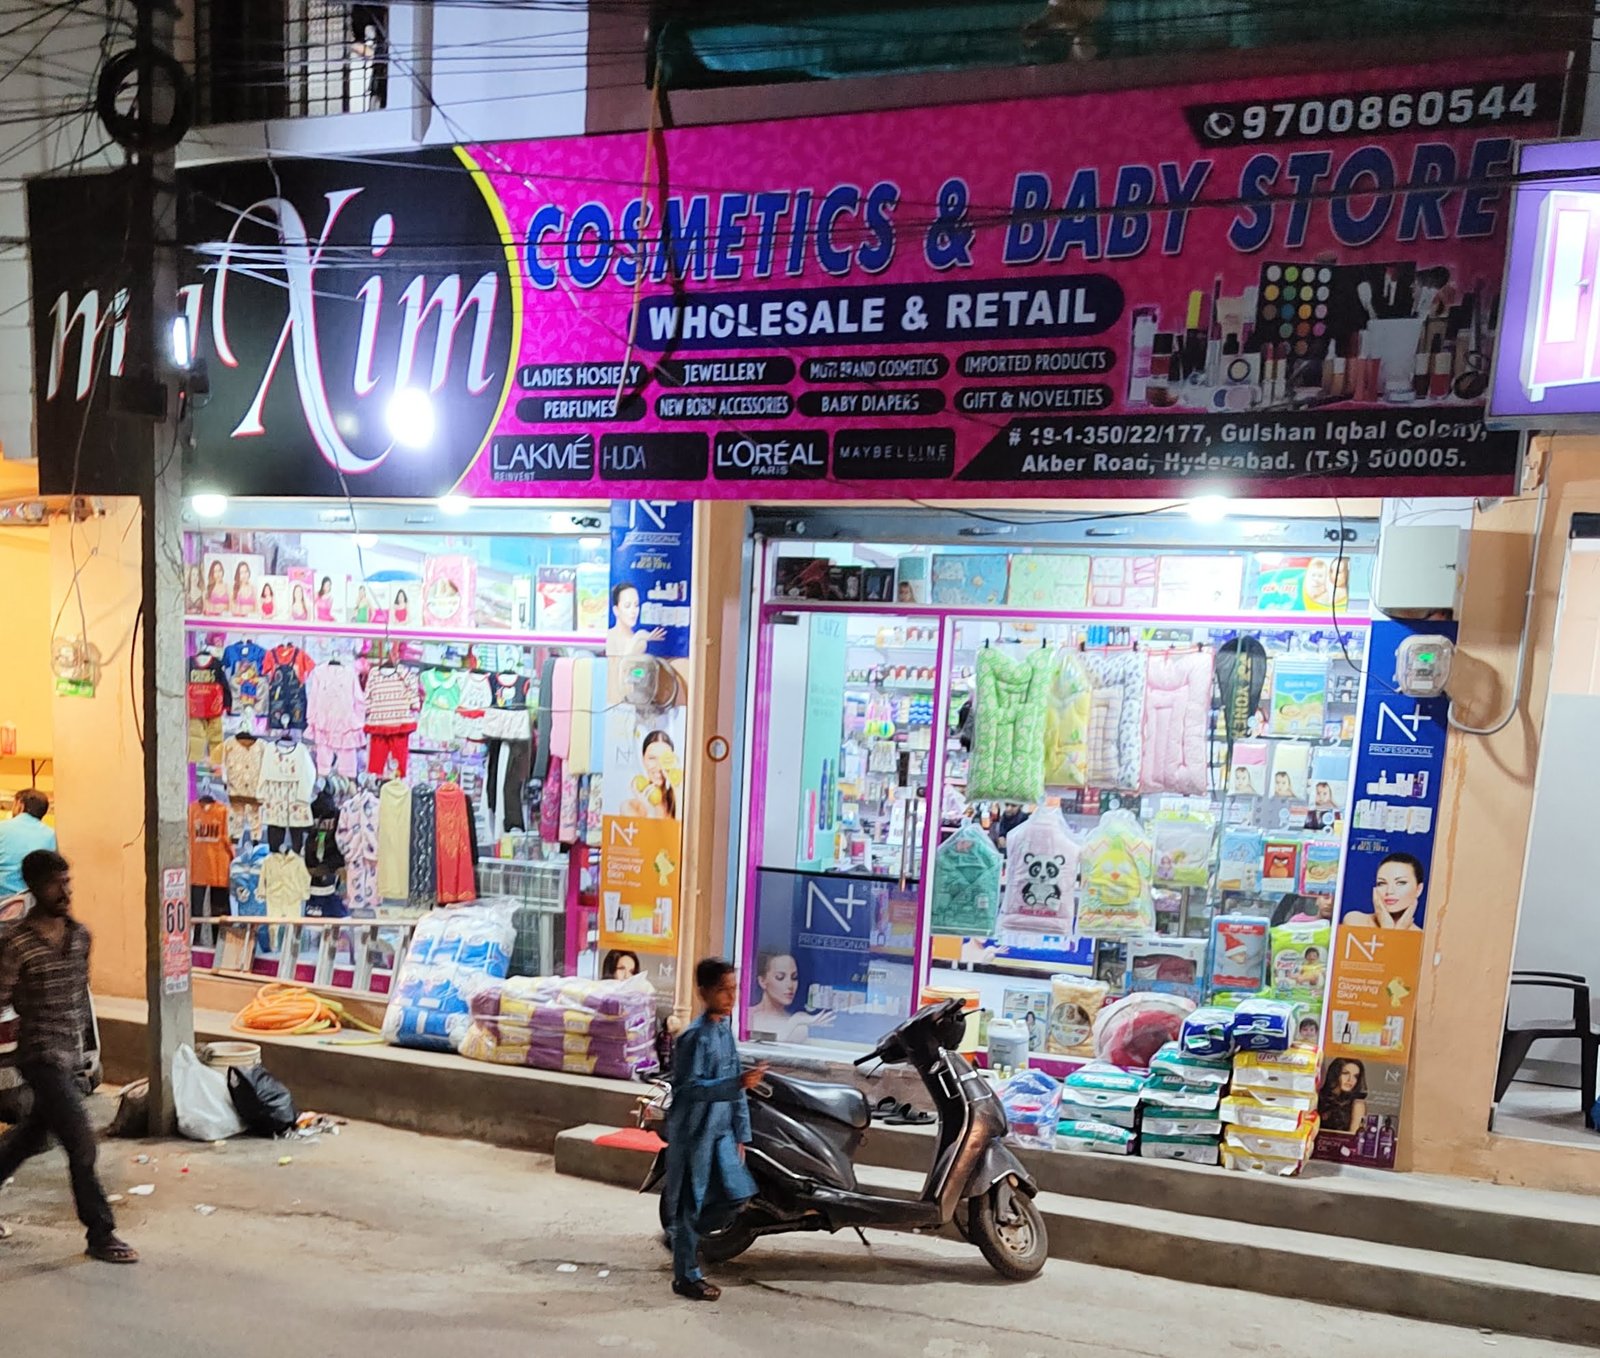 Maxim Cosmetic and Baby Store in Gulshan Iqbal Colony